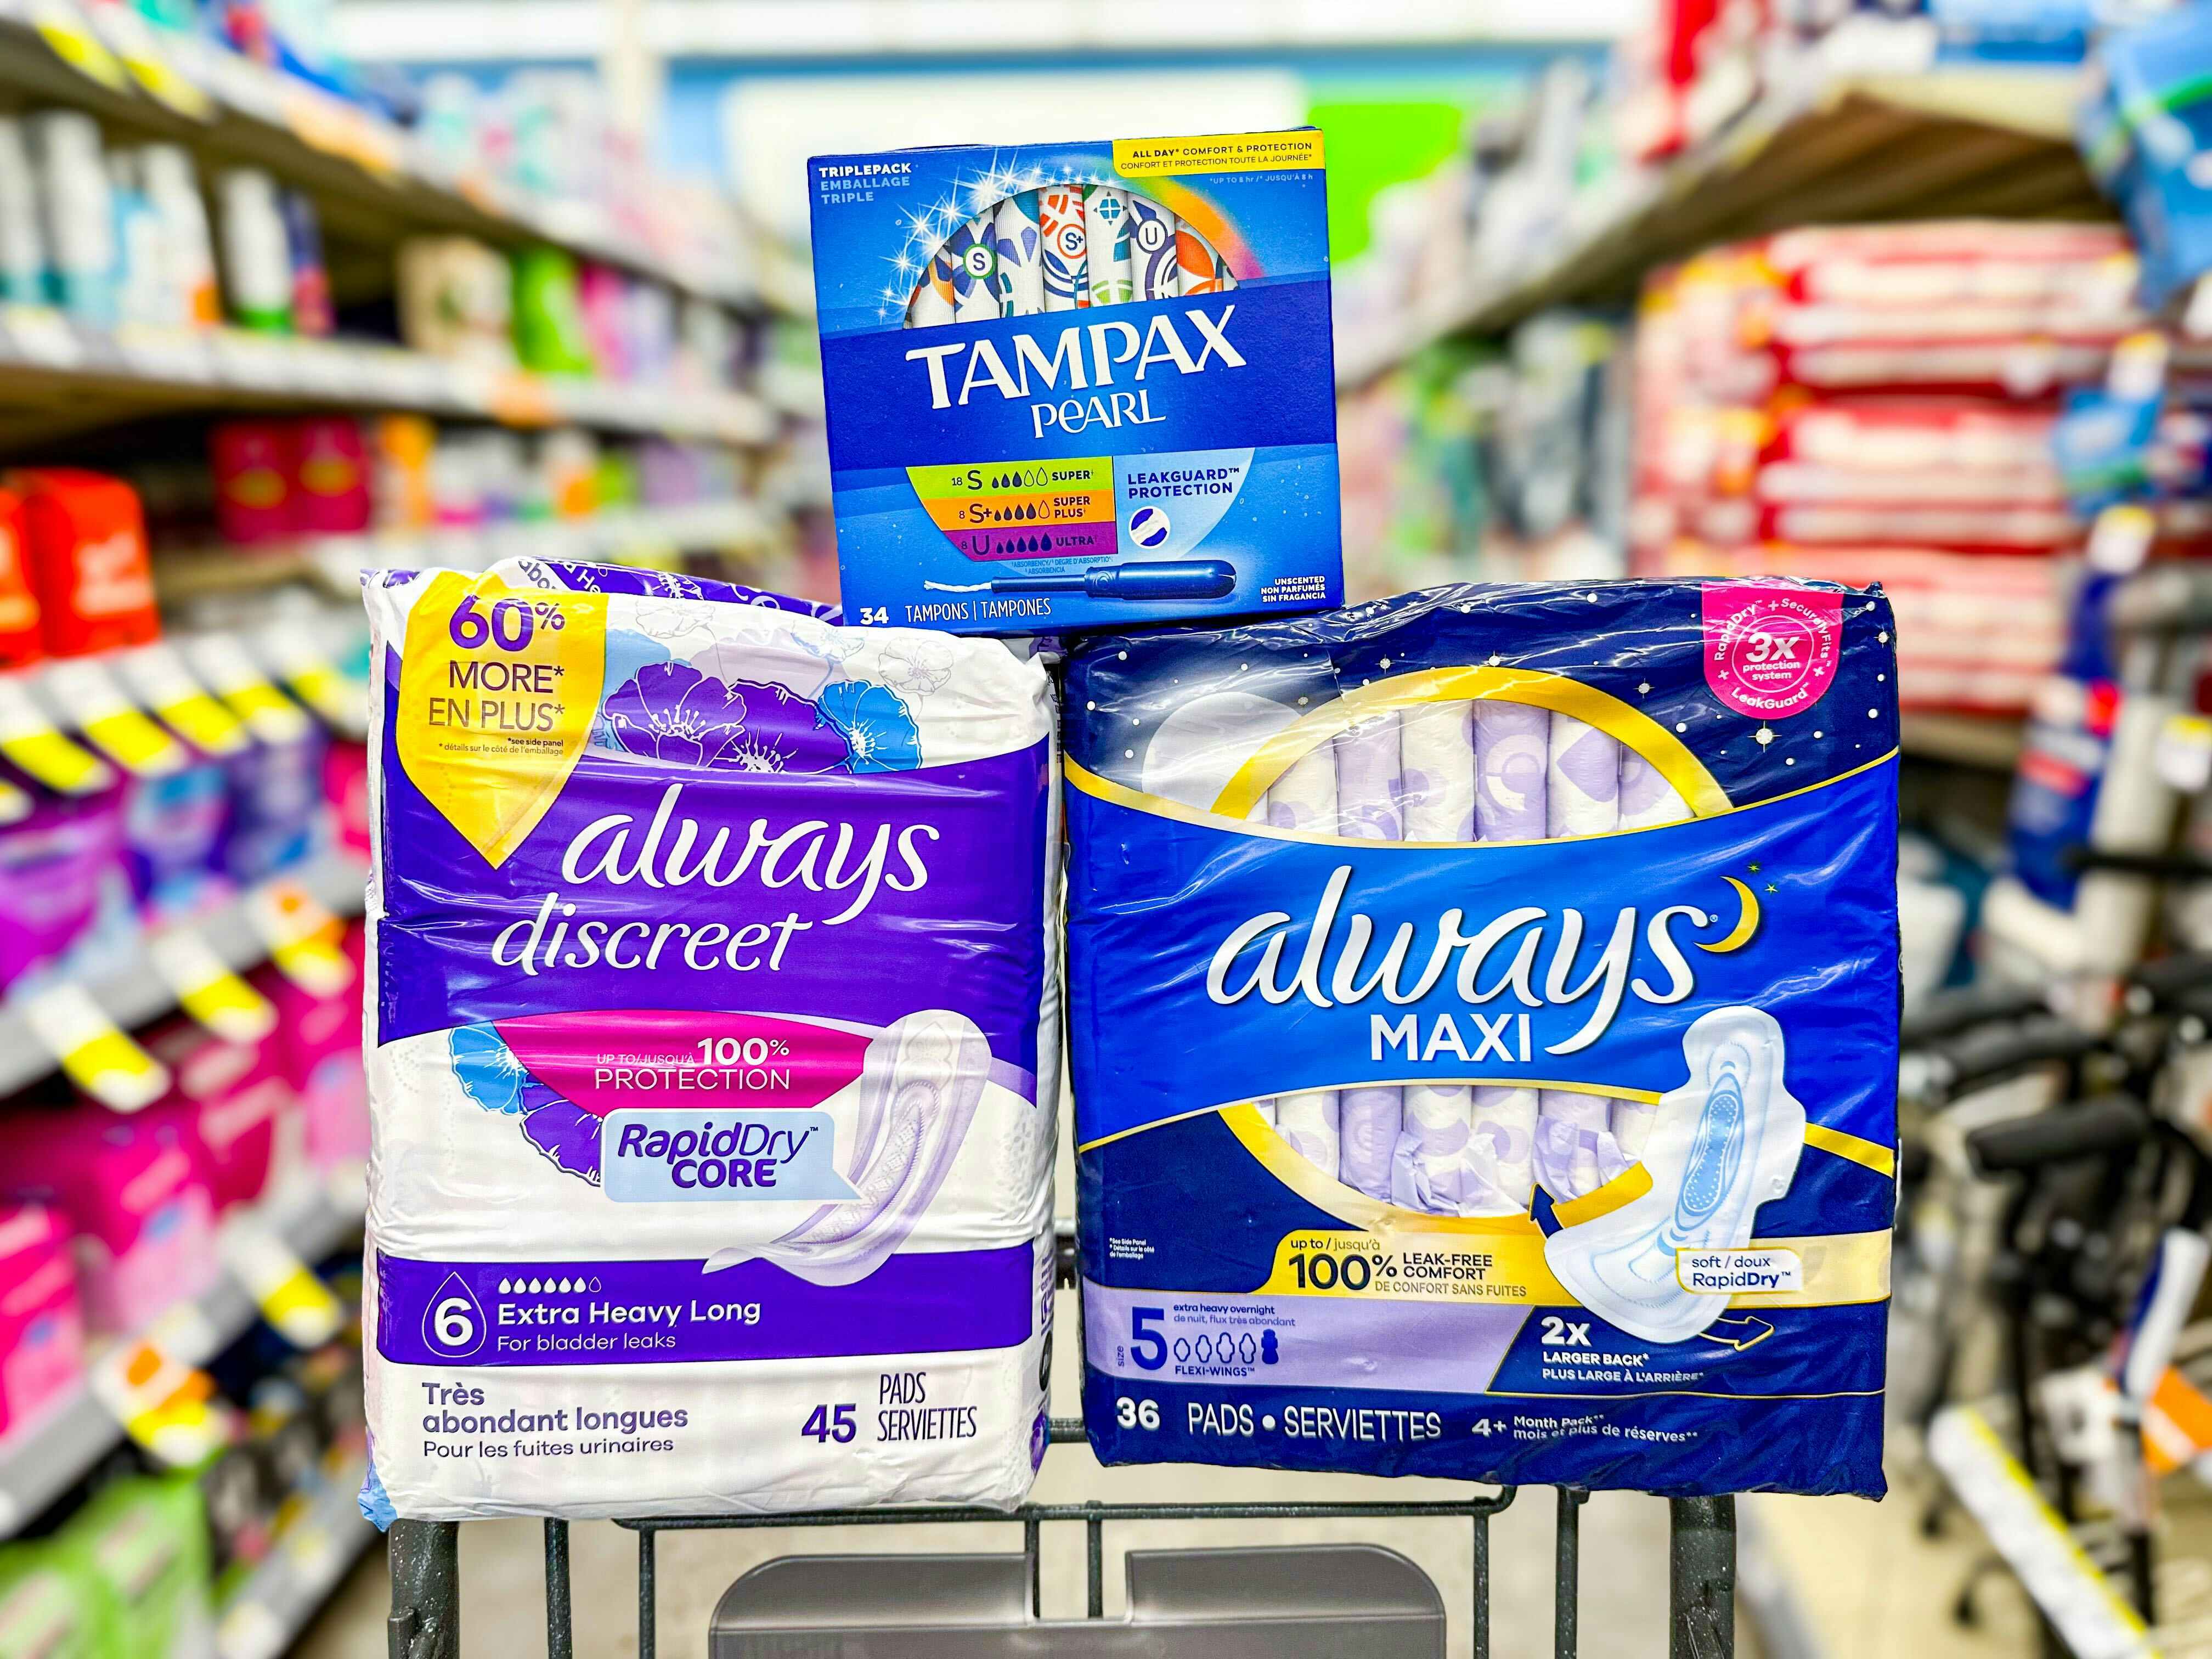 Save 52% on Tampax and 46% on Always at Walgreens